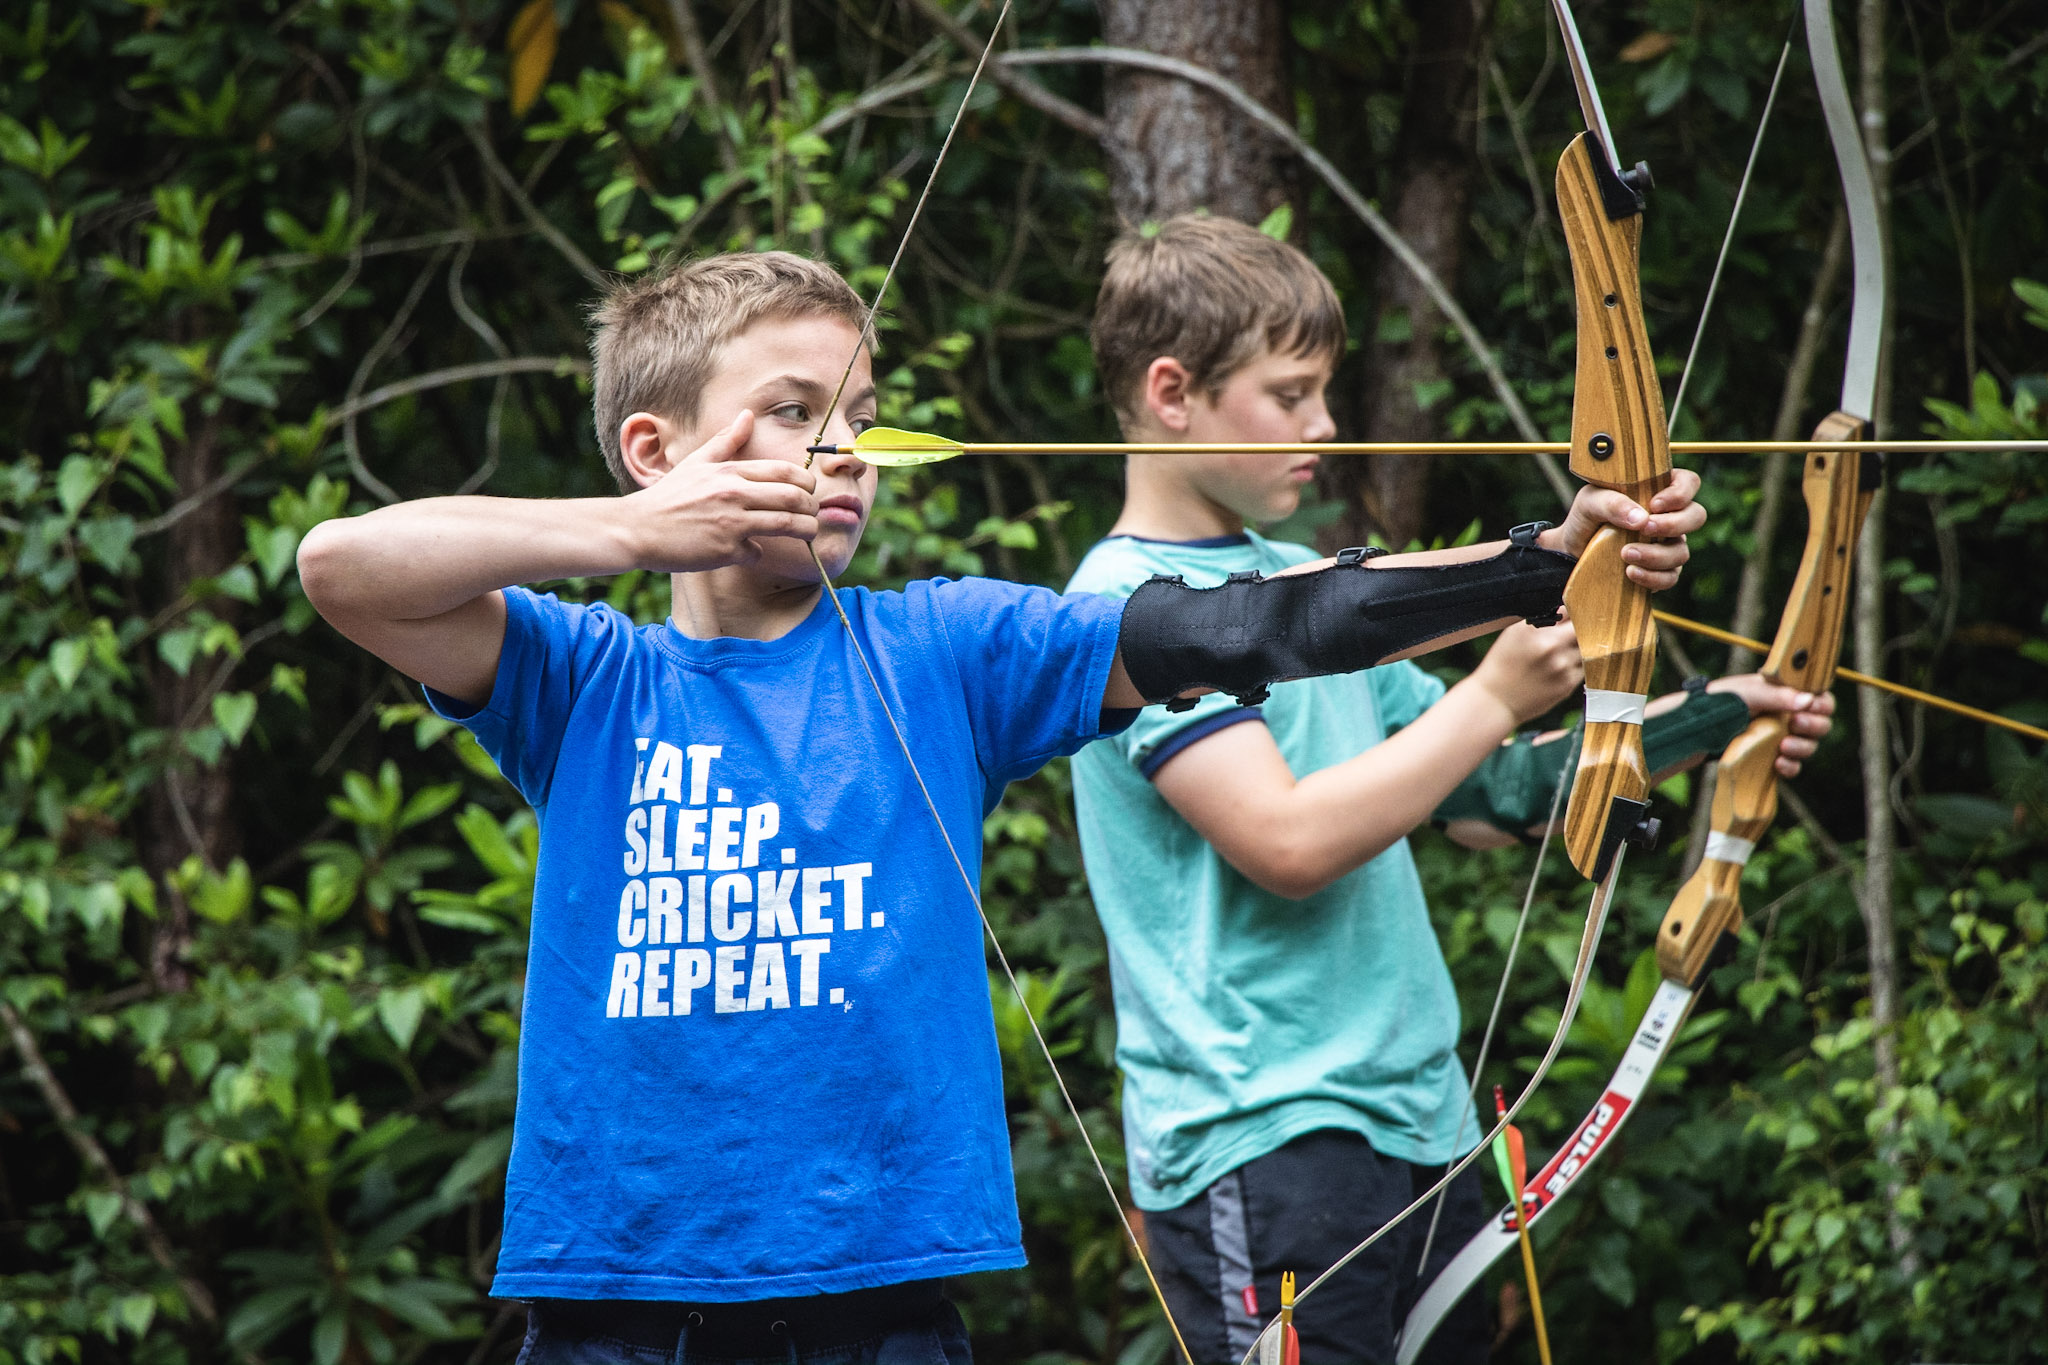 A boy taking part in an archery session in The New Forest